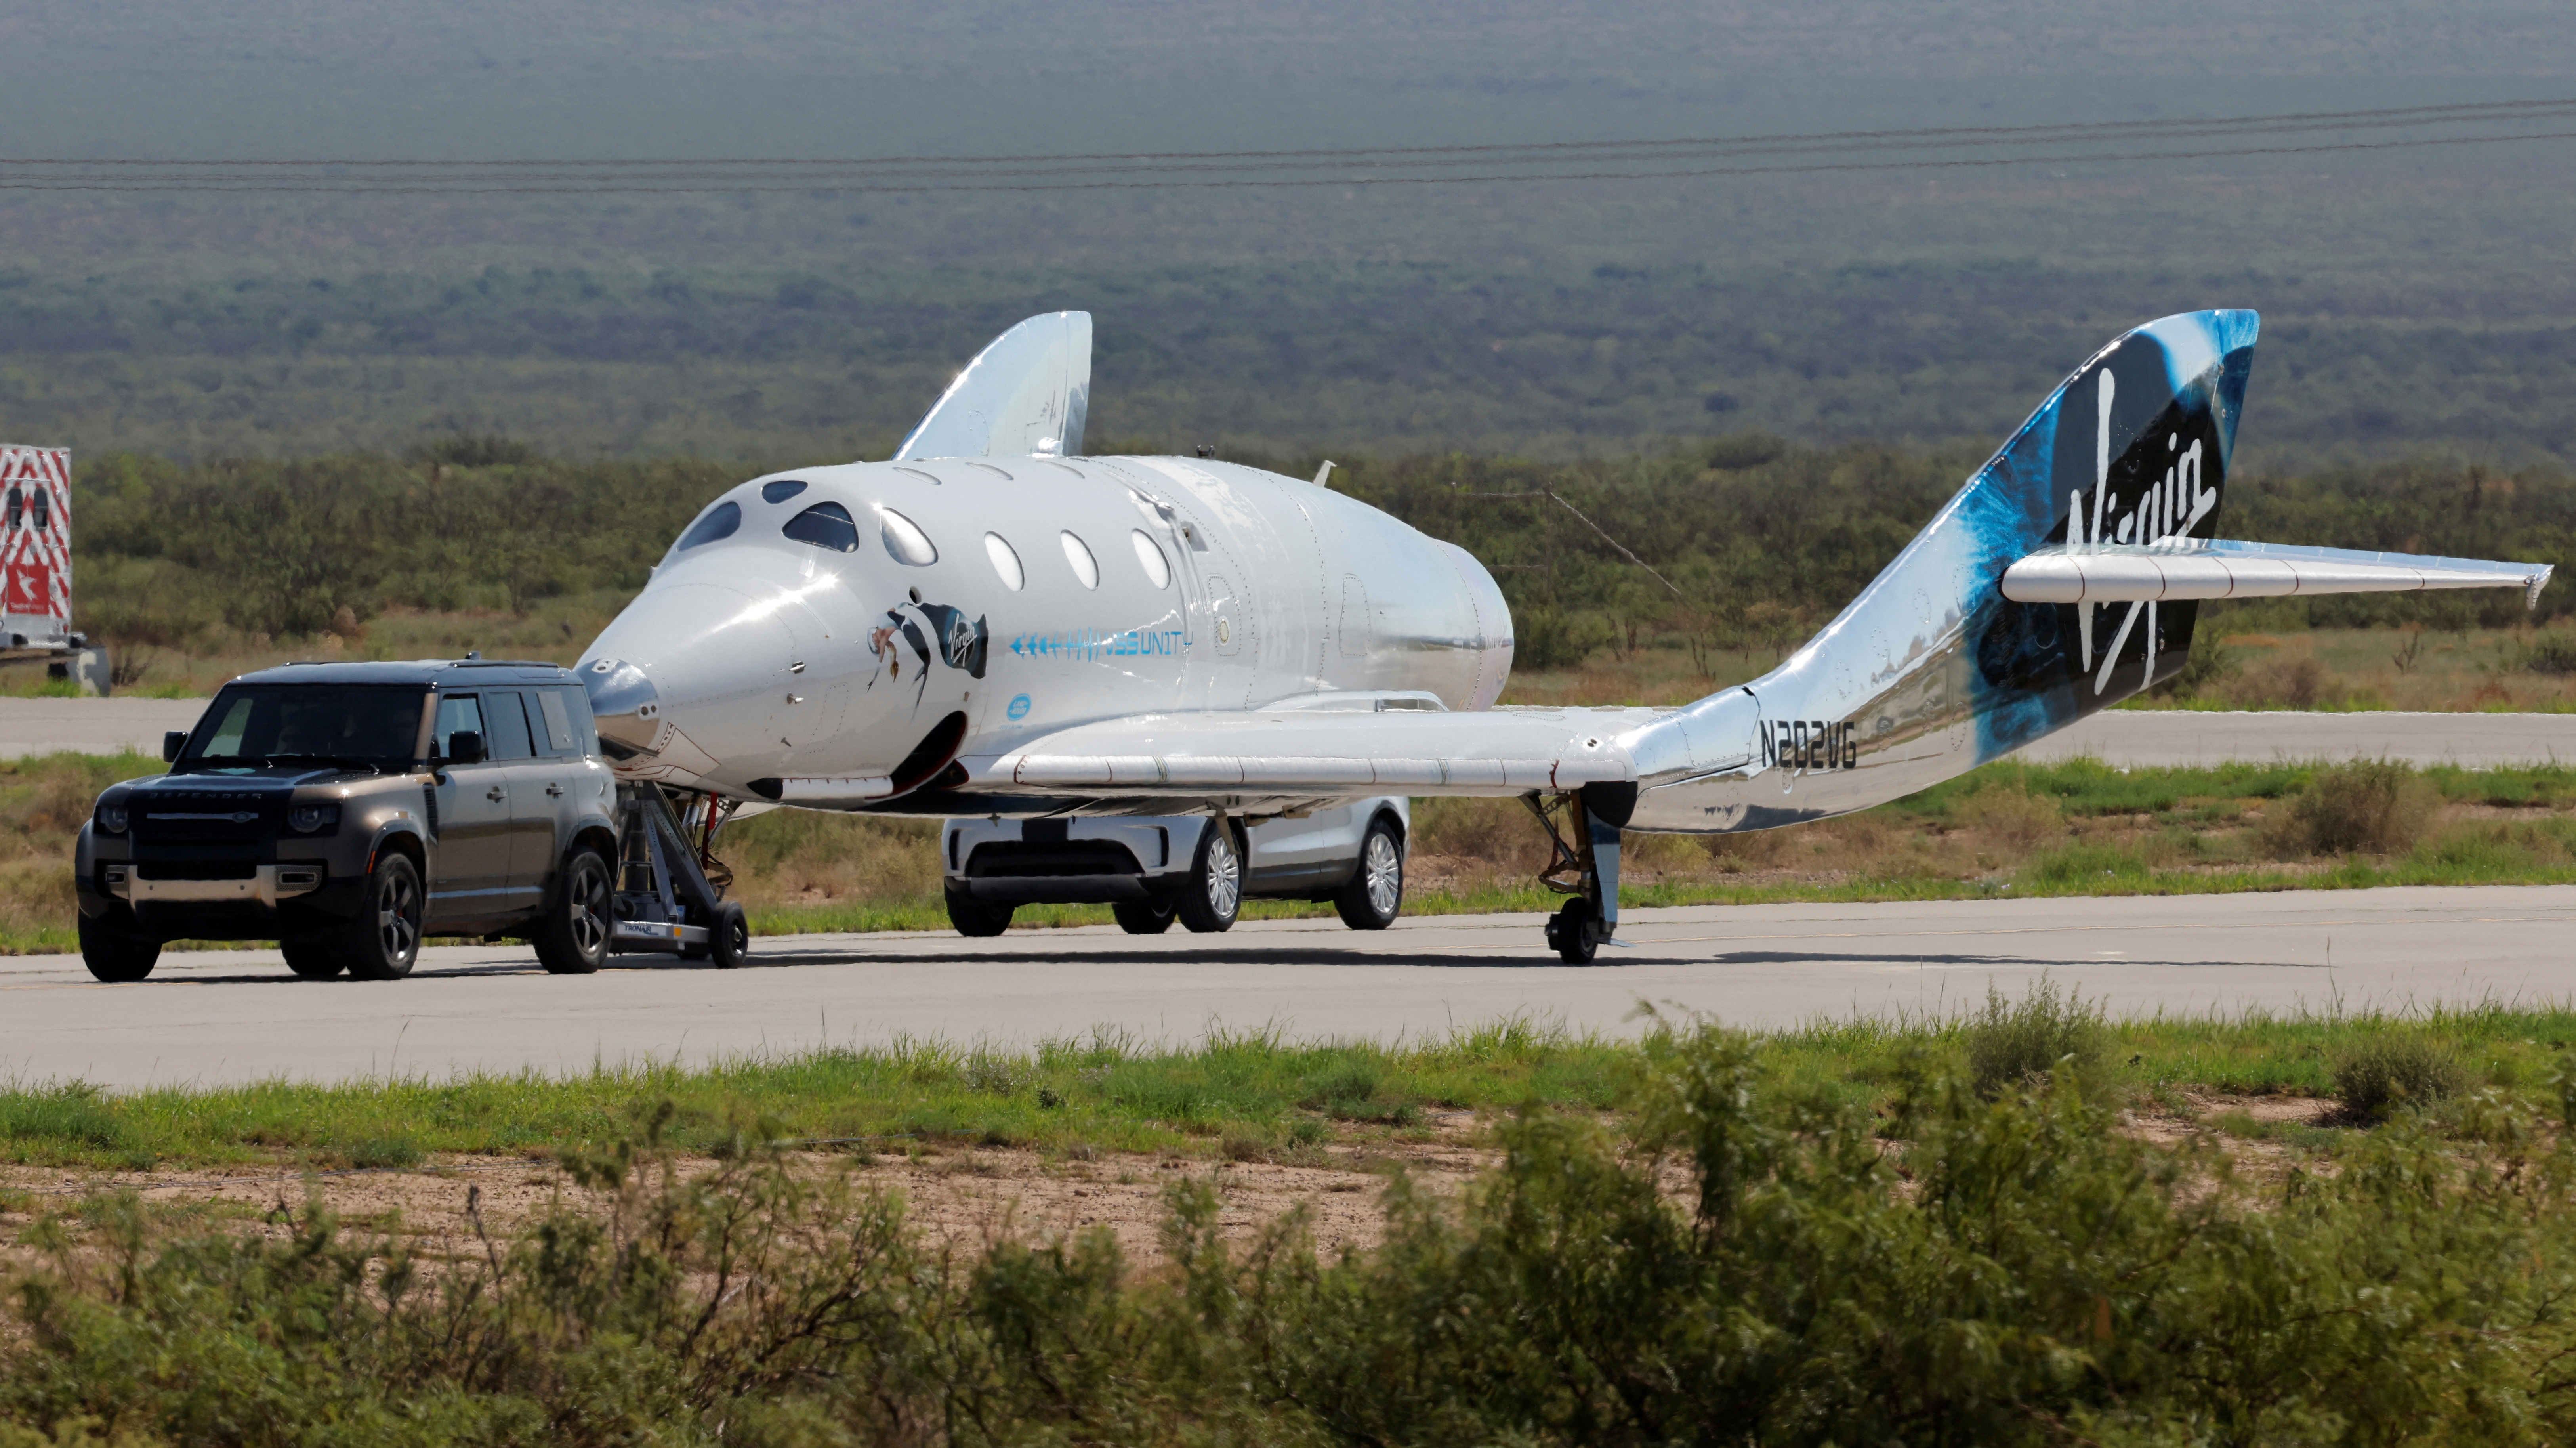 Virgin Galactic's passenger rocket plane VSS Unity is towed after reaching the edge of space above Spaceport America